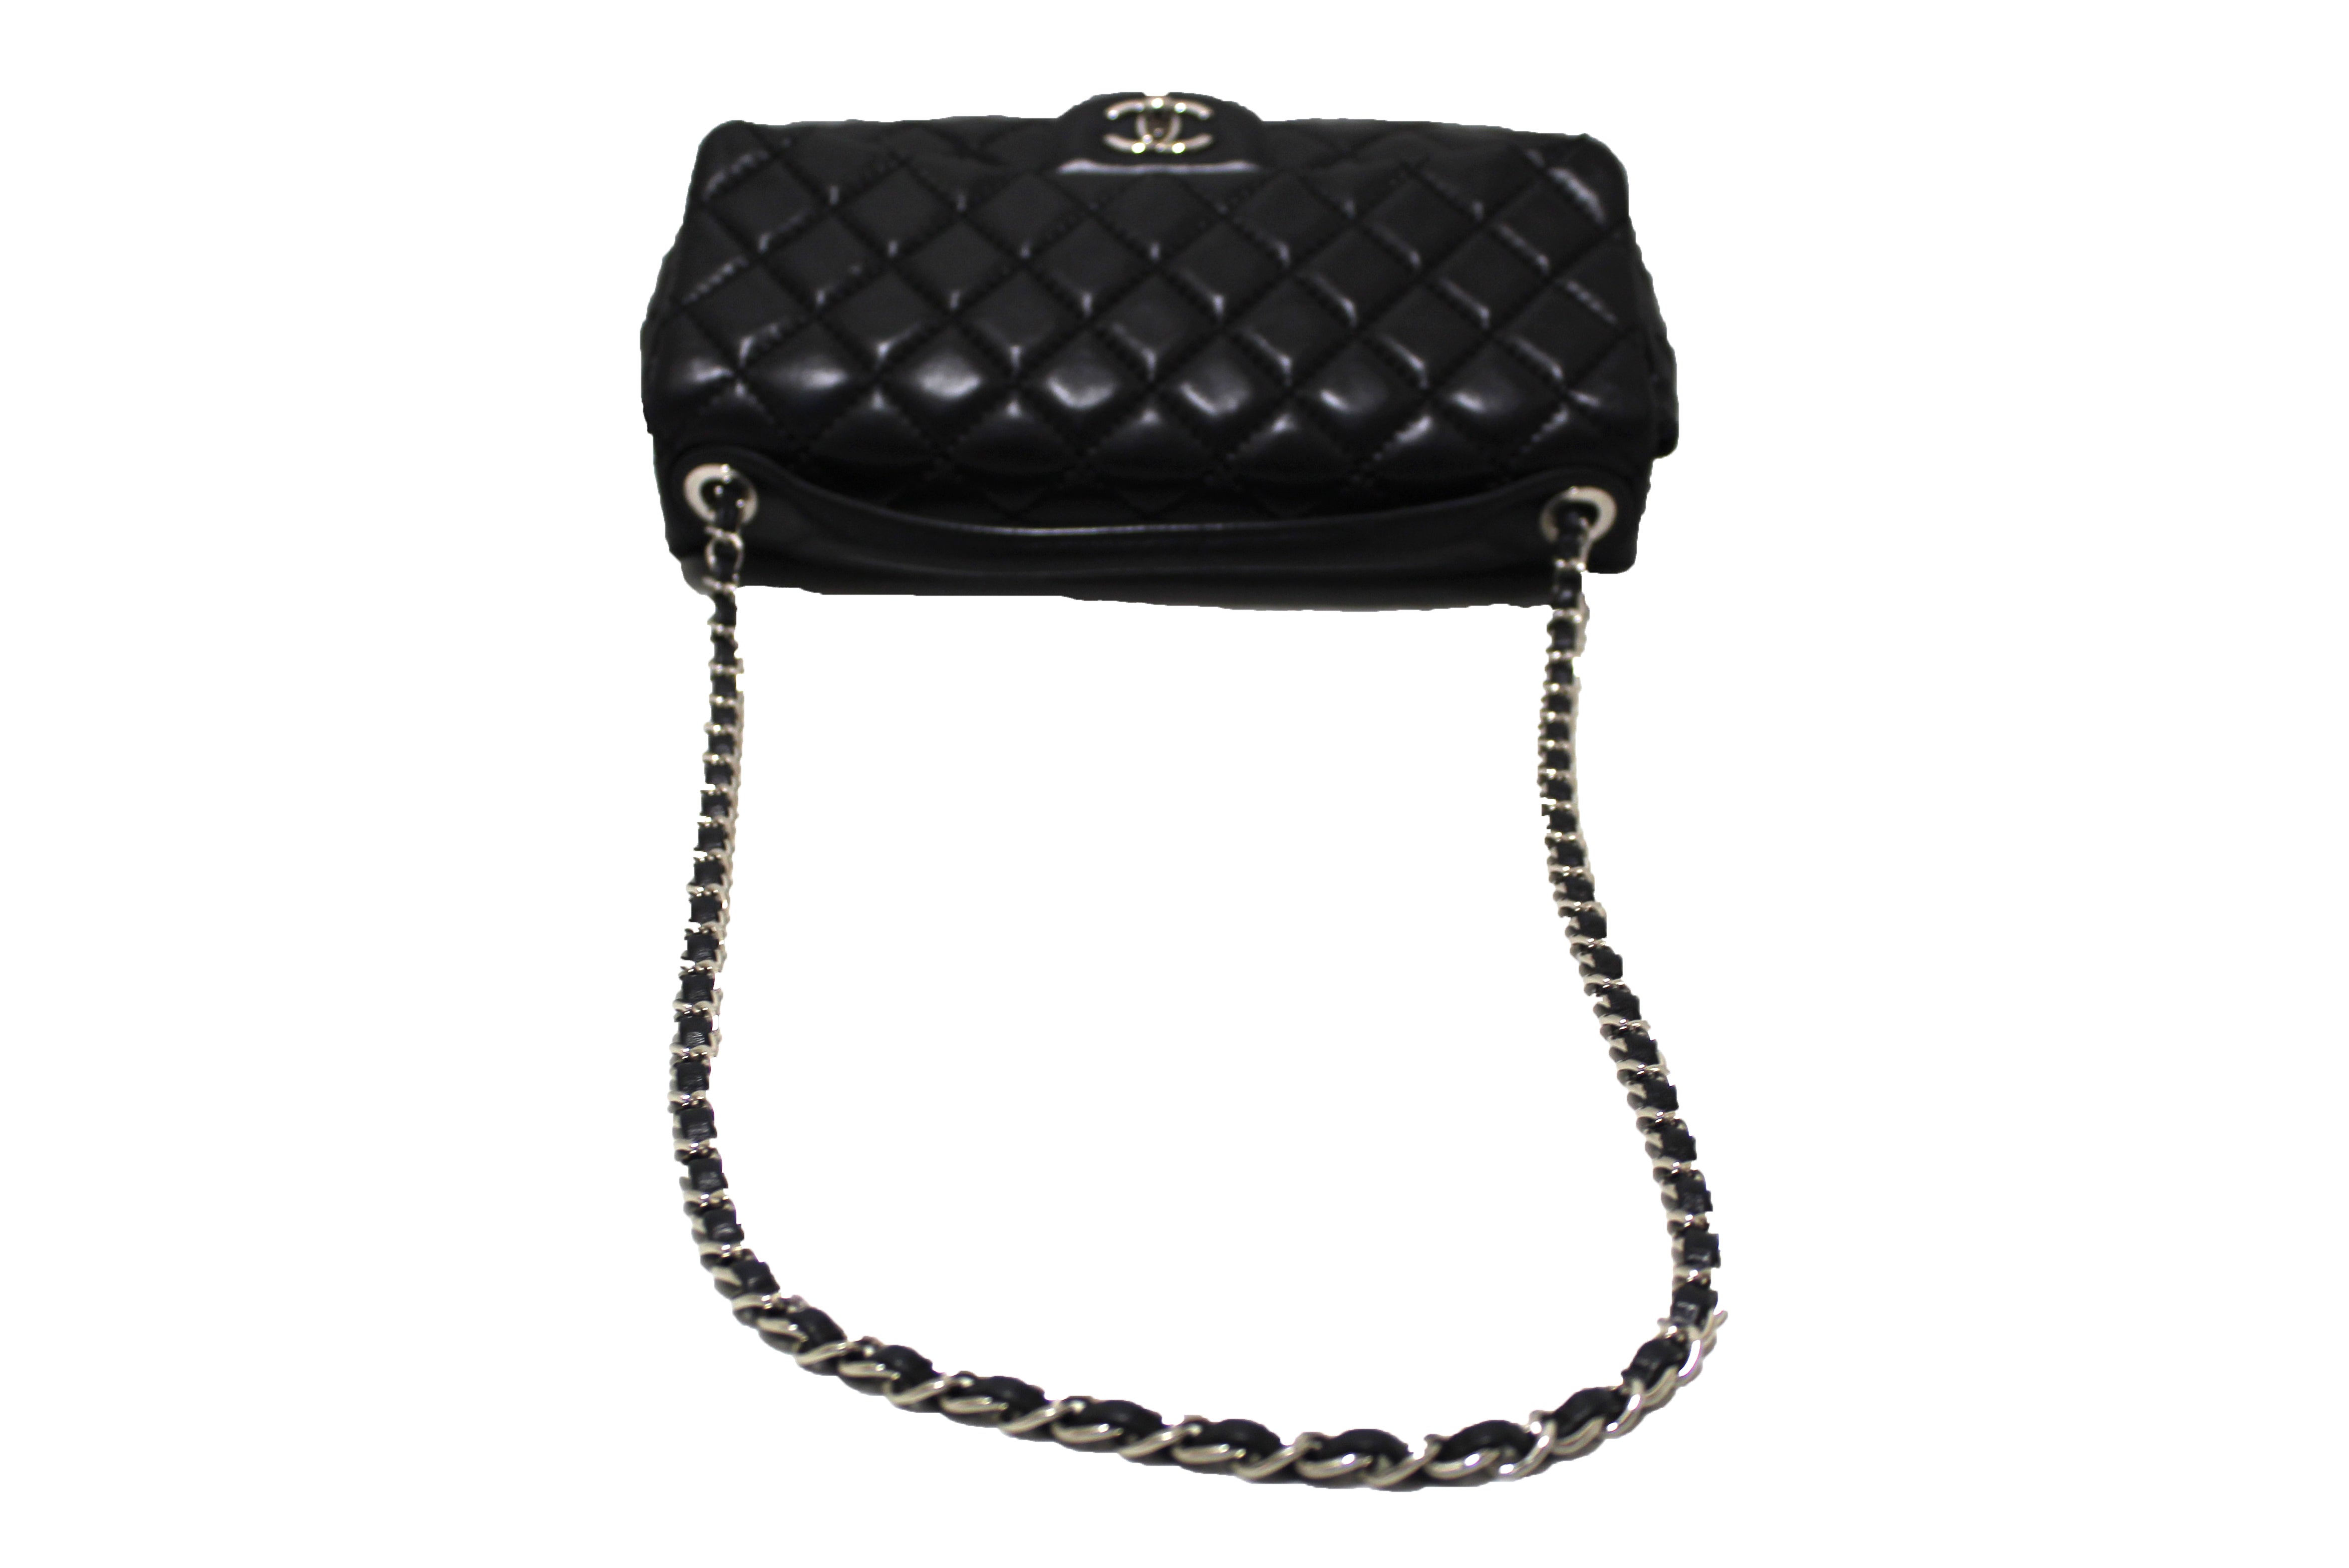 Authentic Chanel Black Quilted Lambskin Easy Carry Jumbo Flap Bag